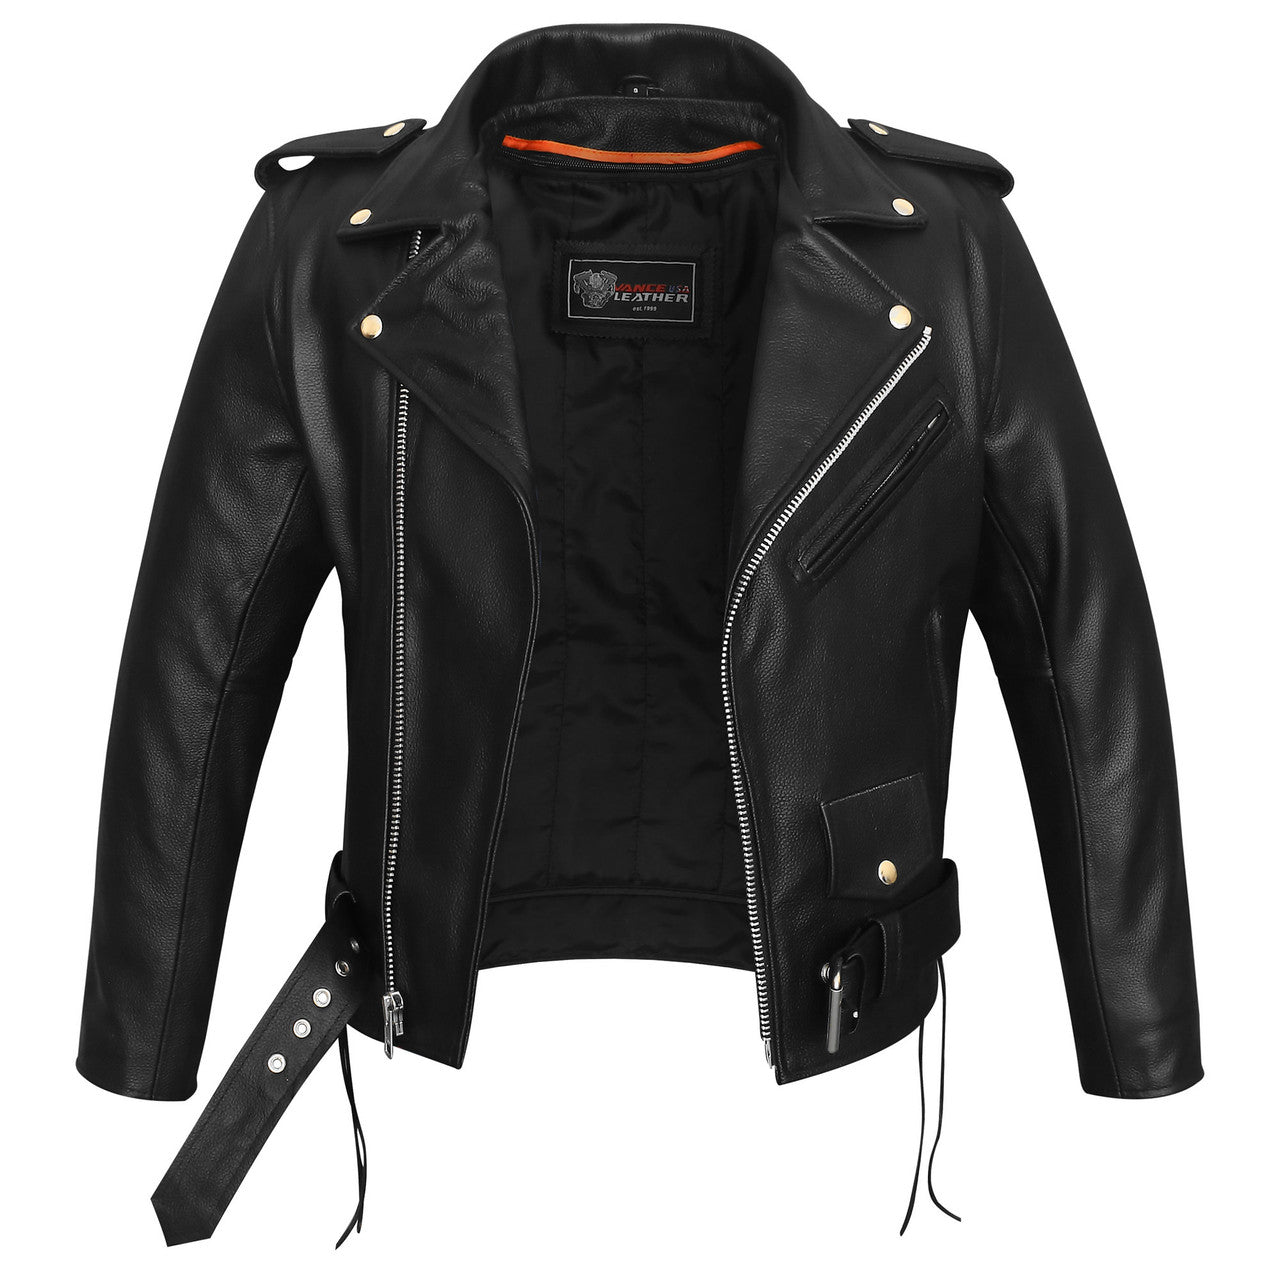 Men's-Premium-Classic-Police-Style-Motorcycle-Black-Leather-Jacket-Conceal-Carry-Side-lace-Removeable-Quilted-Liner-front-open-view